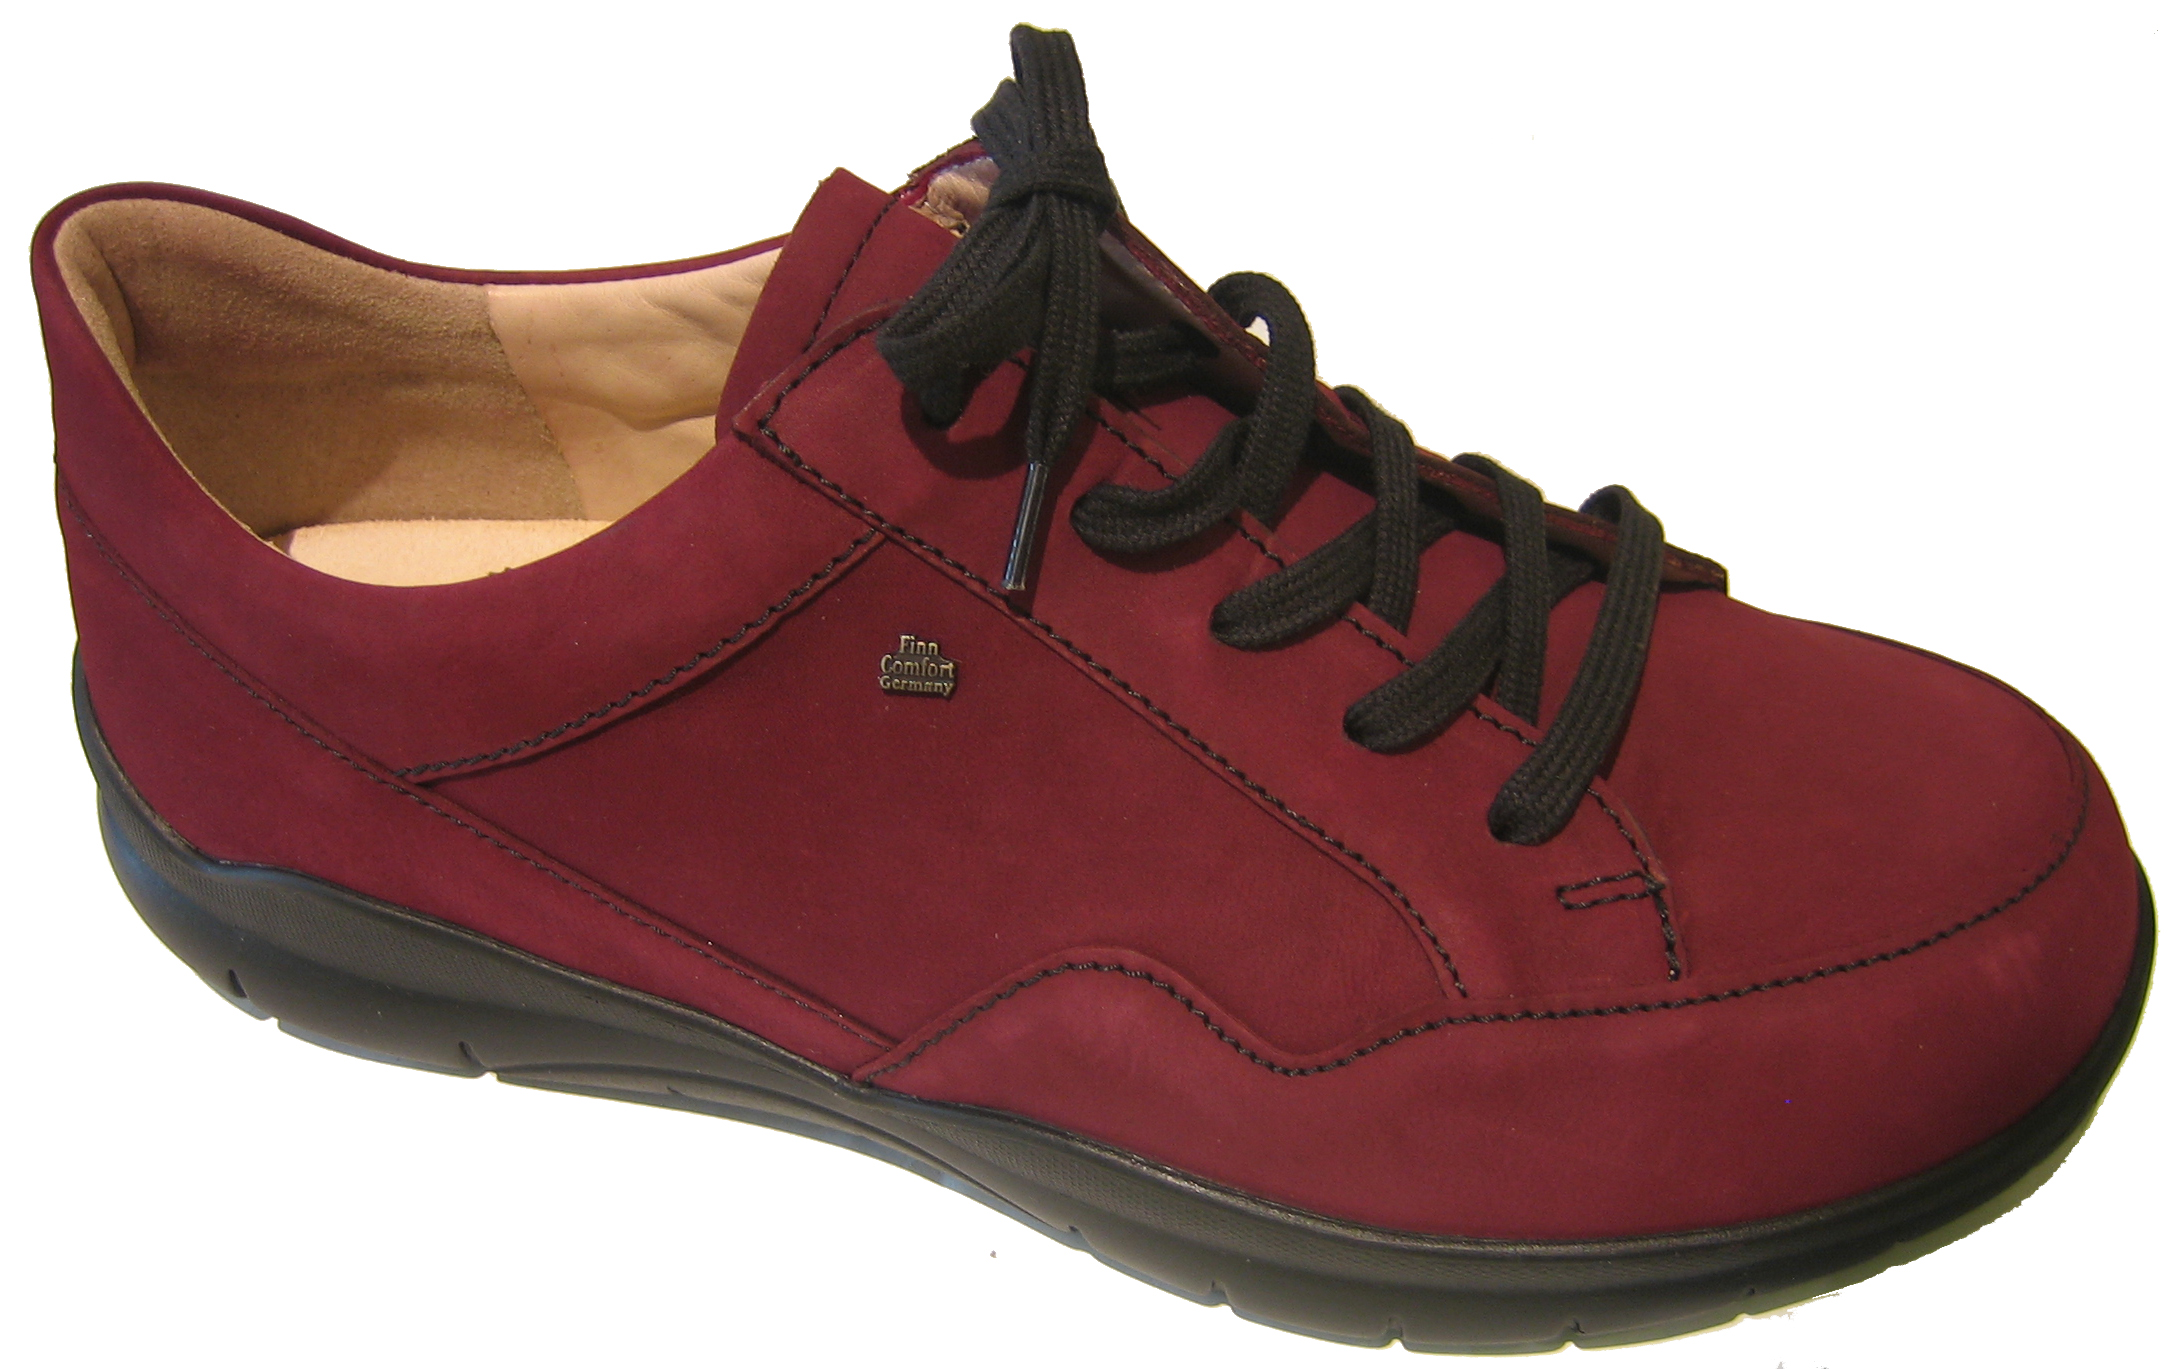 Ord Patagonia Redwine Finncomfort, How To Get Red Wine Out Of Leather Shoes